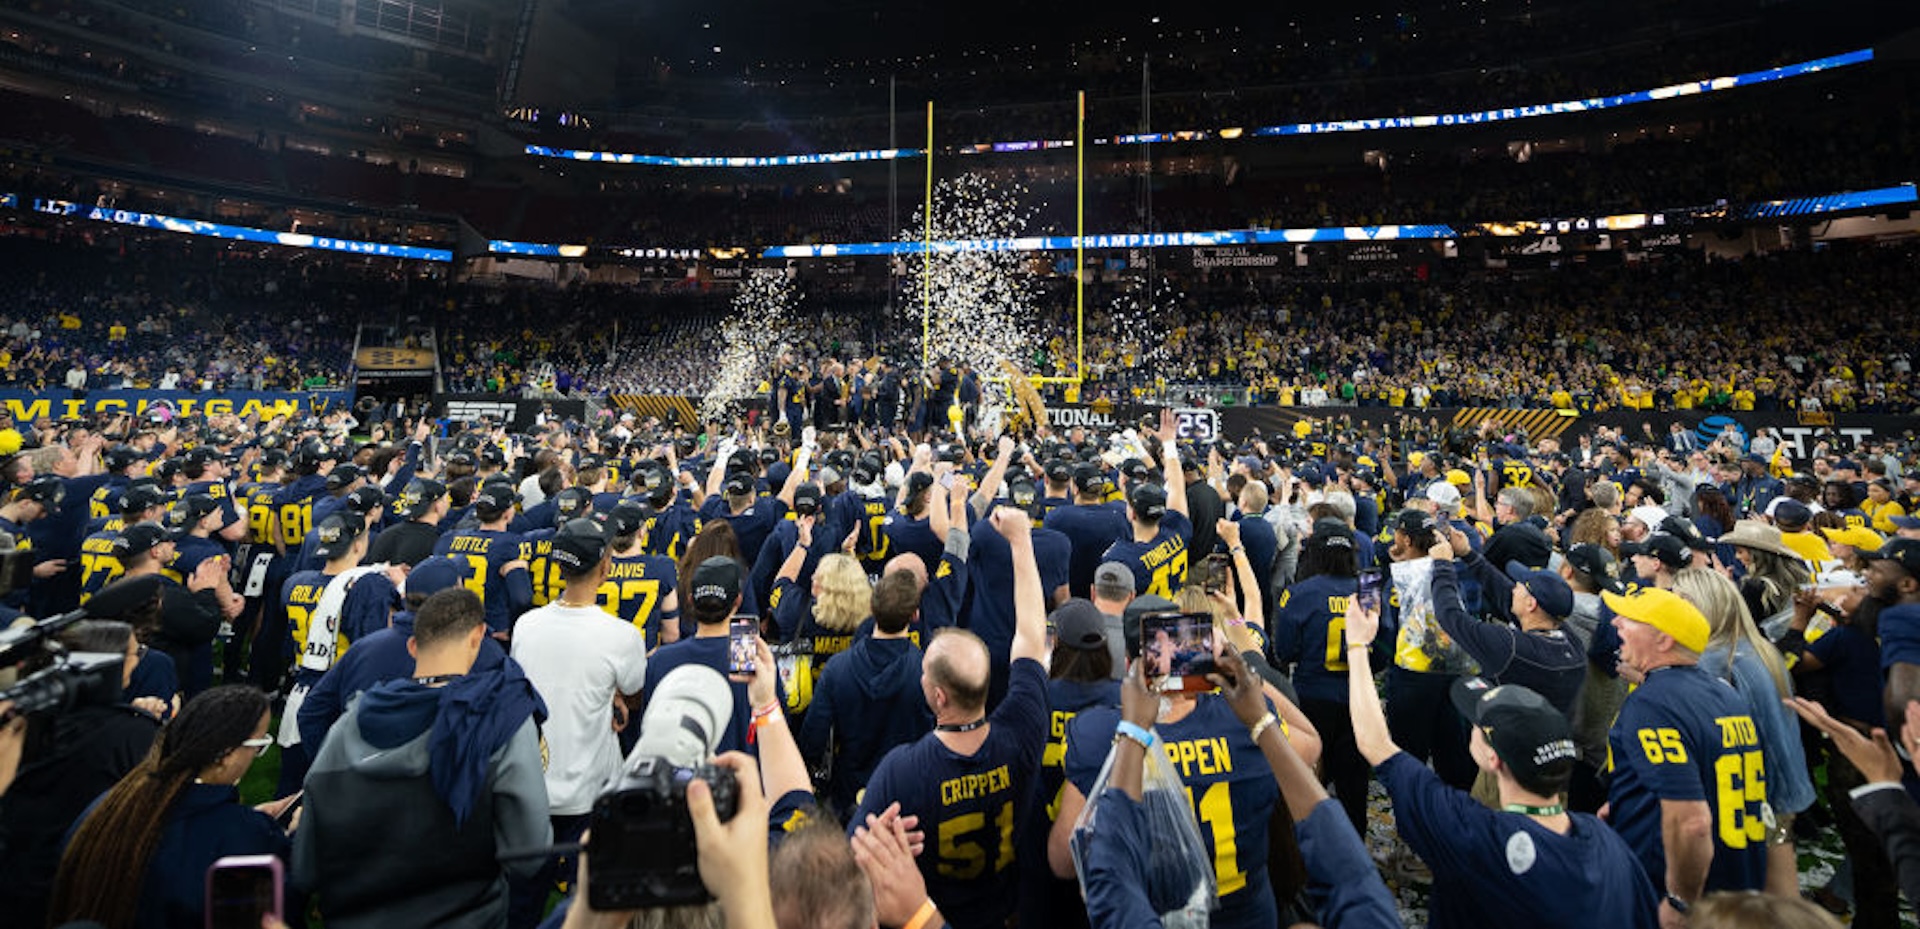 The Michigan Wolverines celebrate after winning the 2024 CFP National Championship game against the Washington Huskies at NRG Stadium on January 08, 2024 in Houston, Texas. The Michigan Wolverines won the game 34-13.